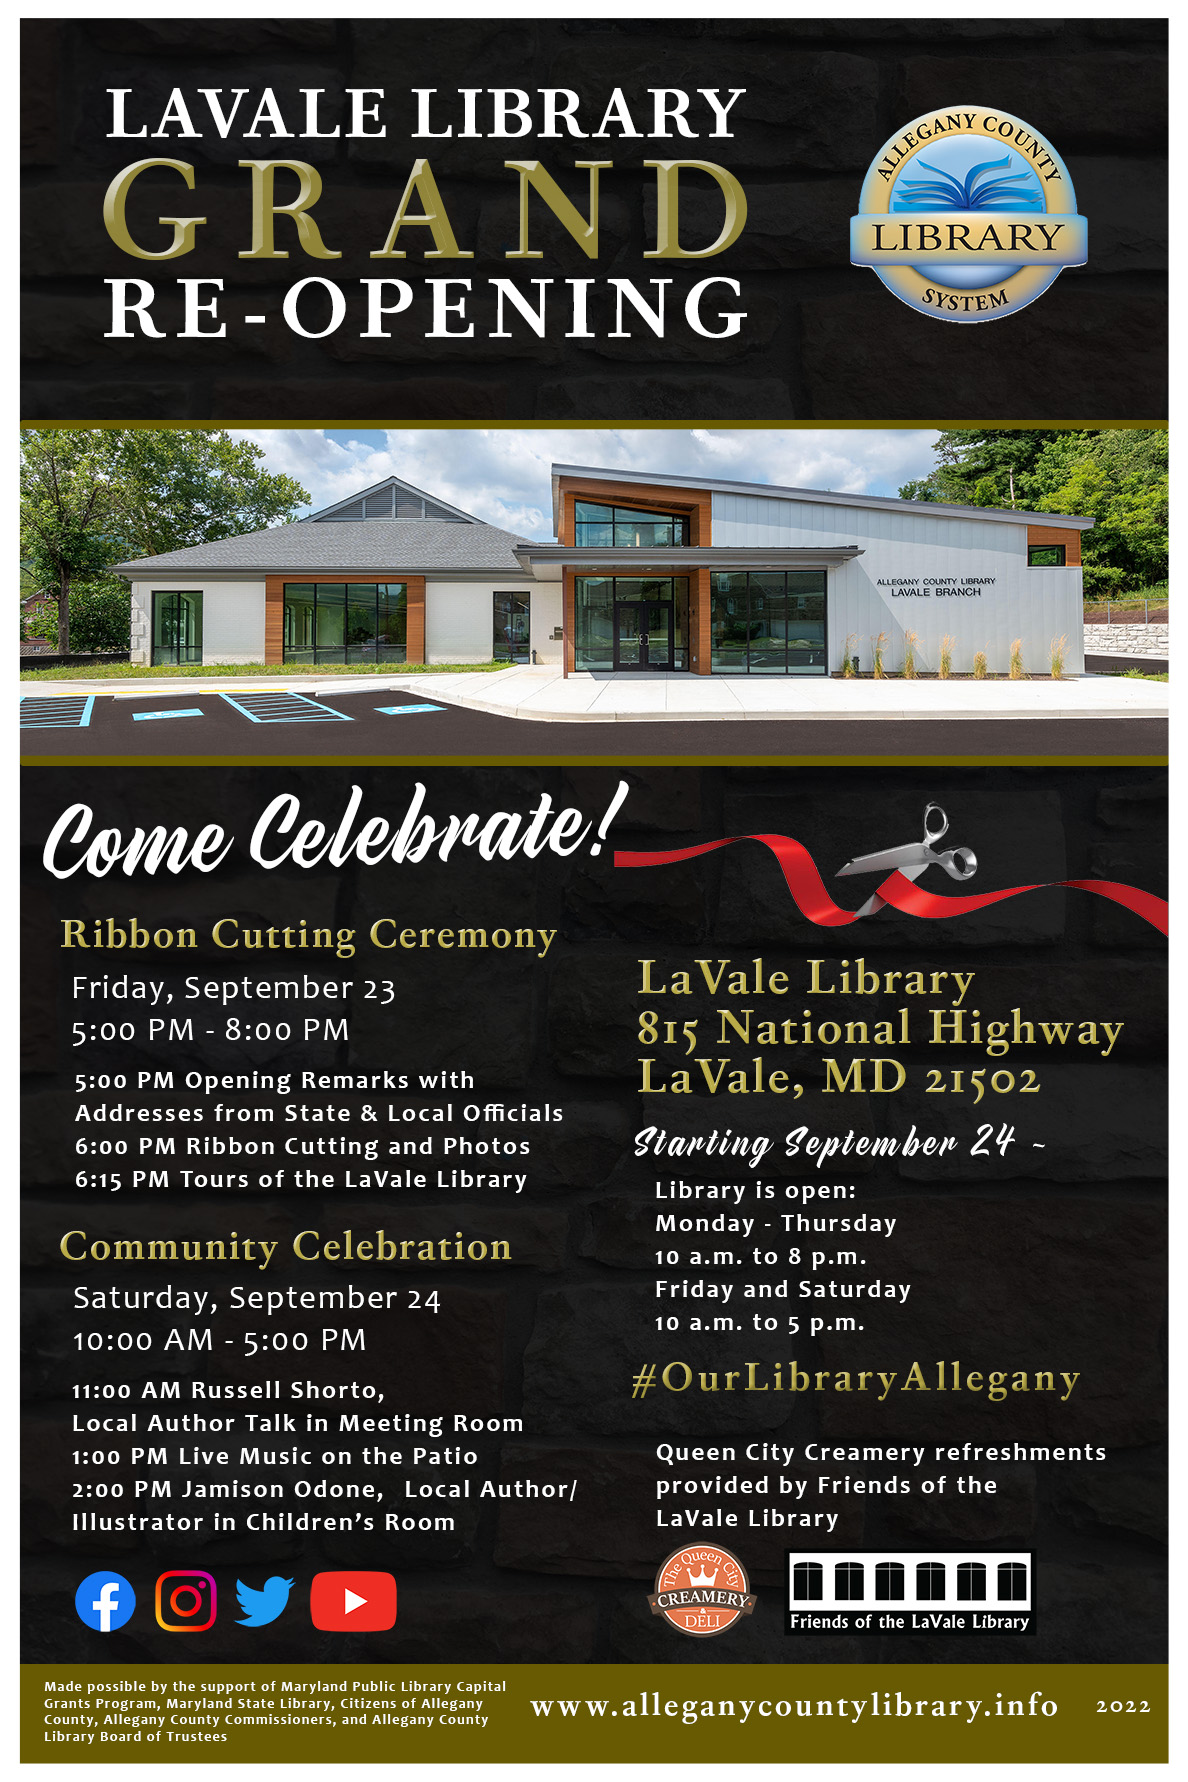 LaVale Library reopening poster